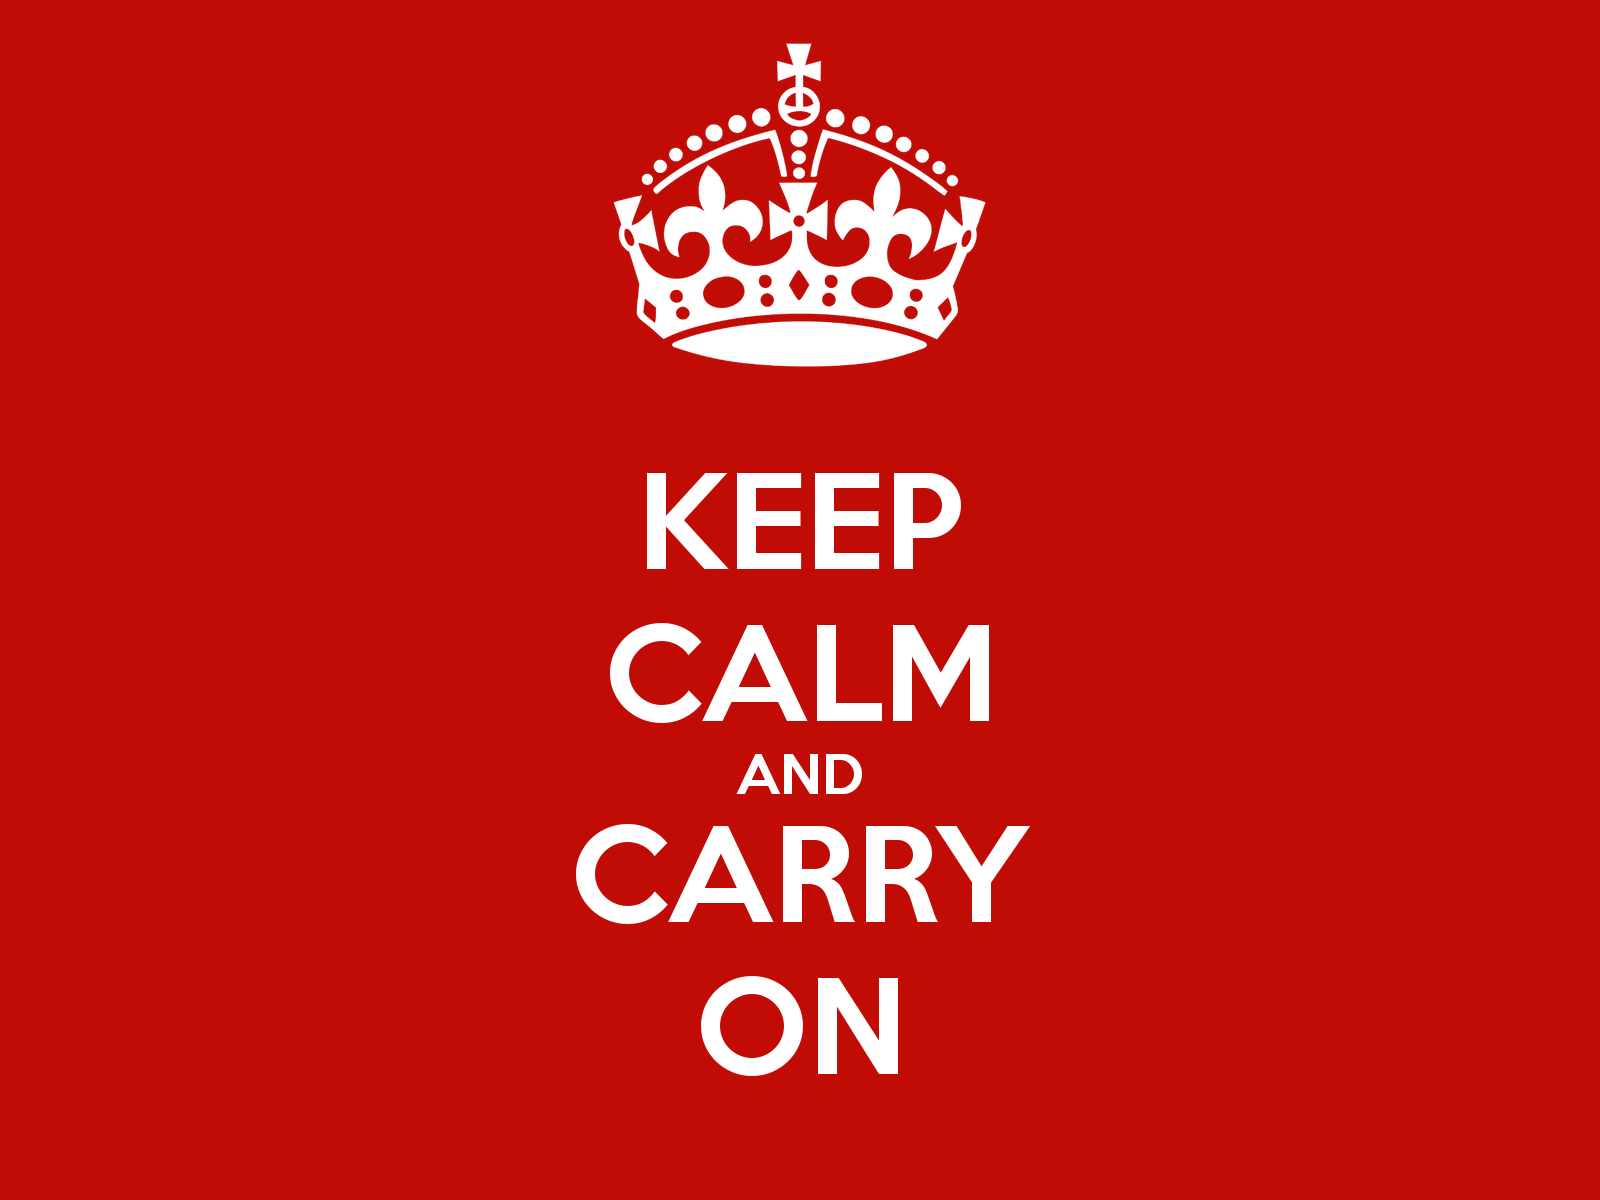 keep calm and carry on in christ